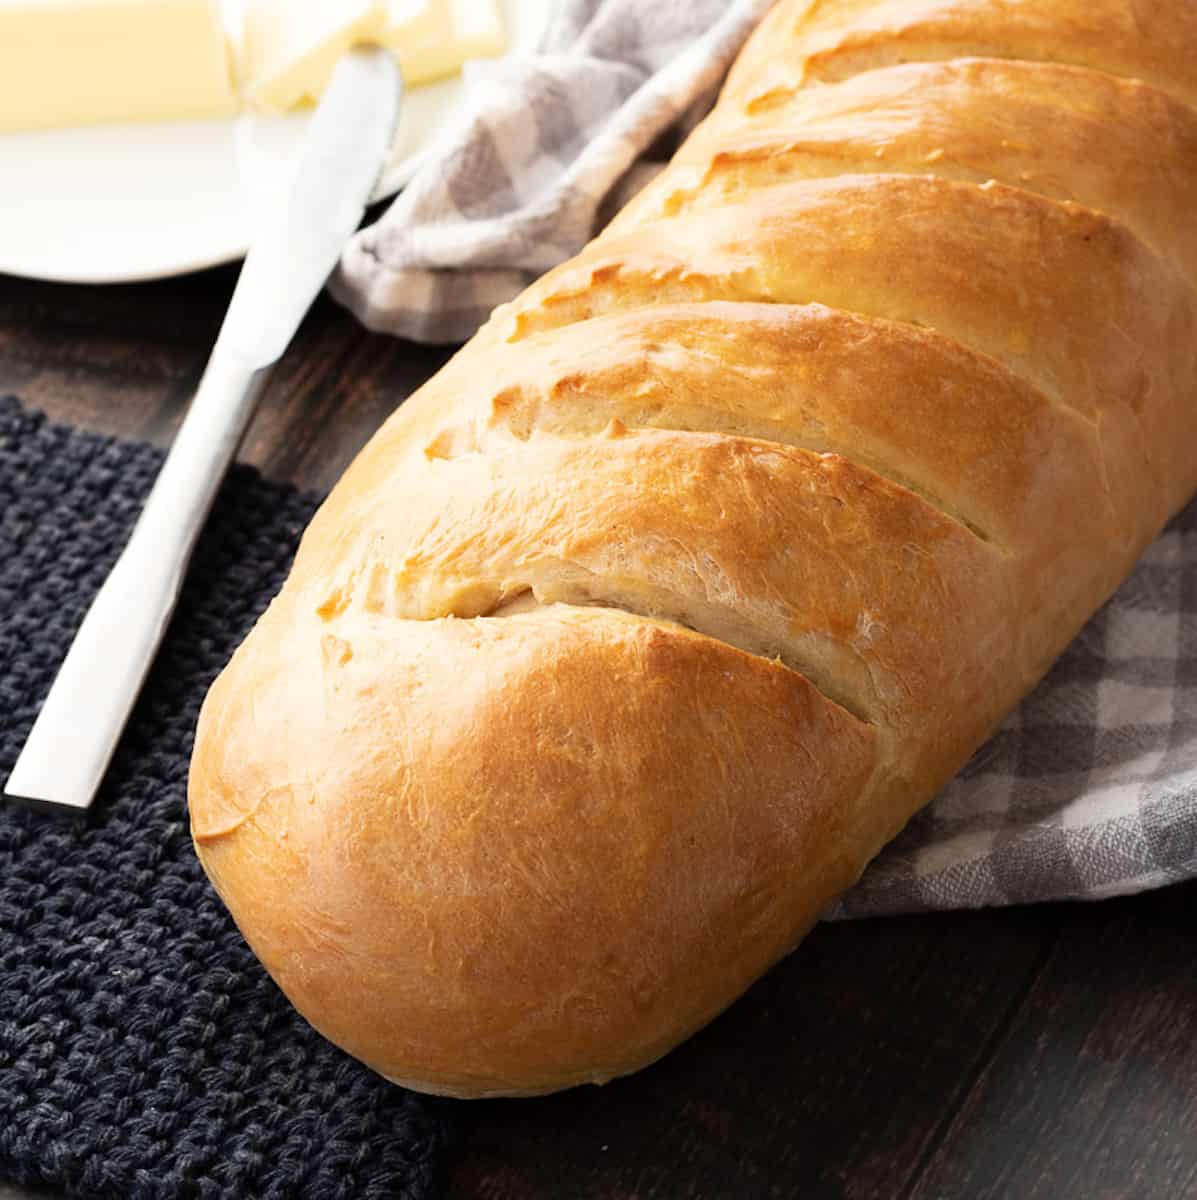 Baked loaf of fluffy french bread on wood table with towel, butter, and knife.